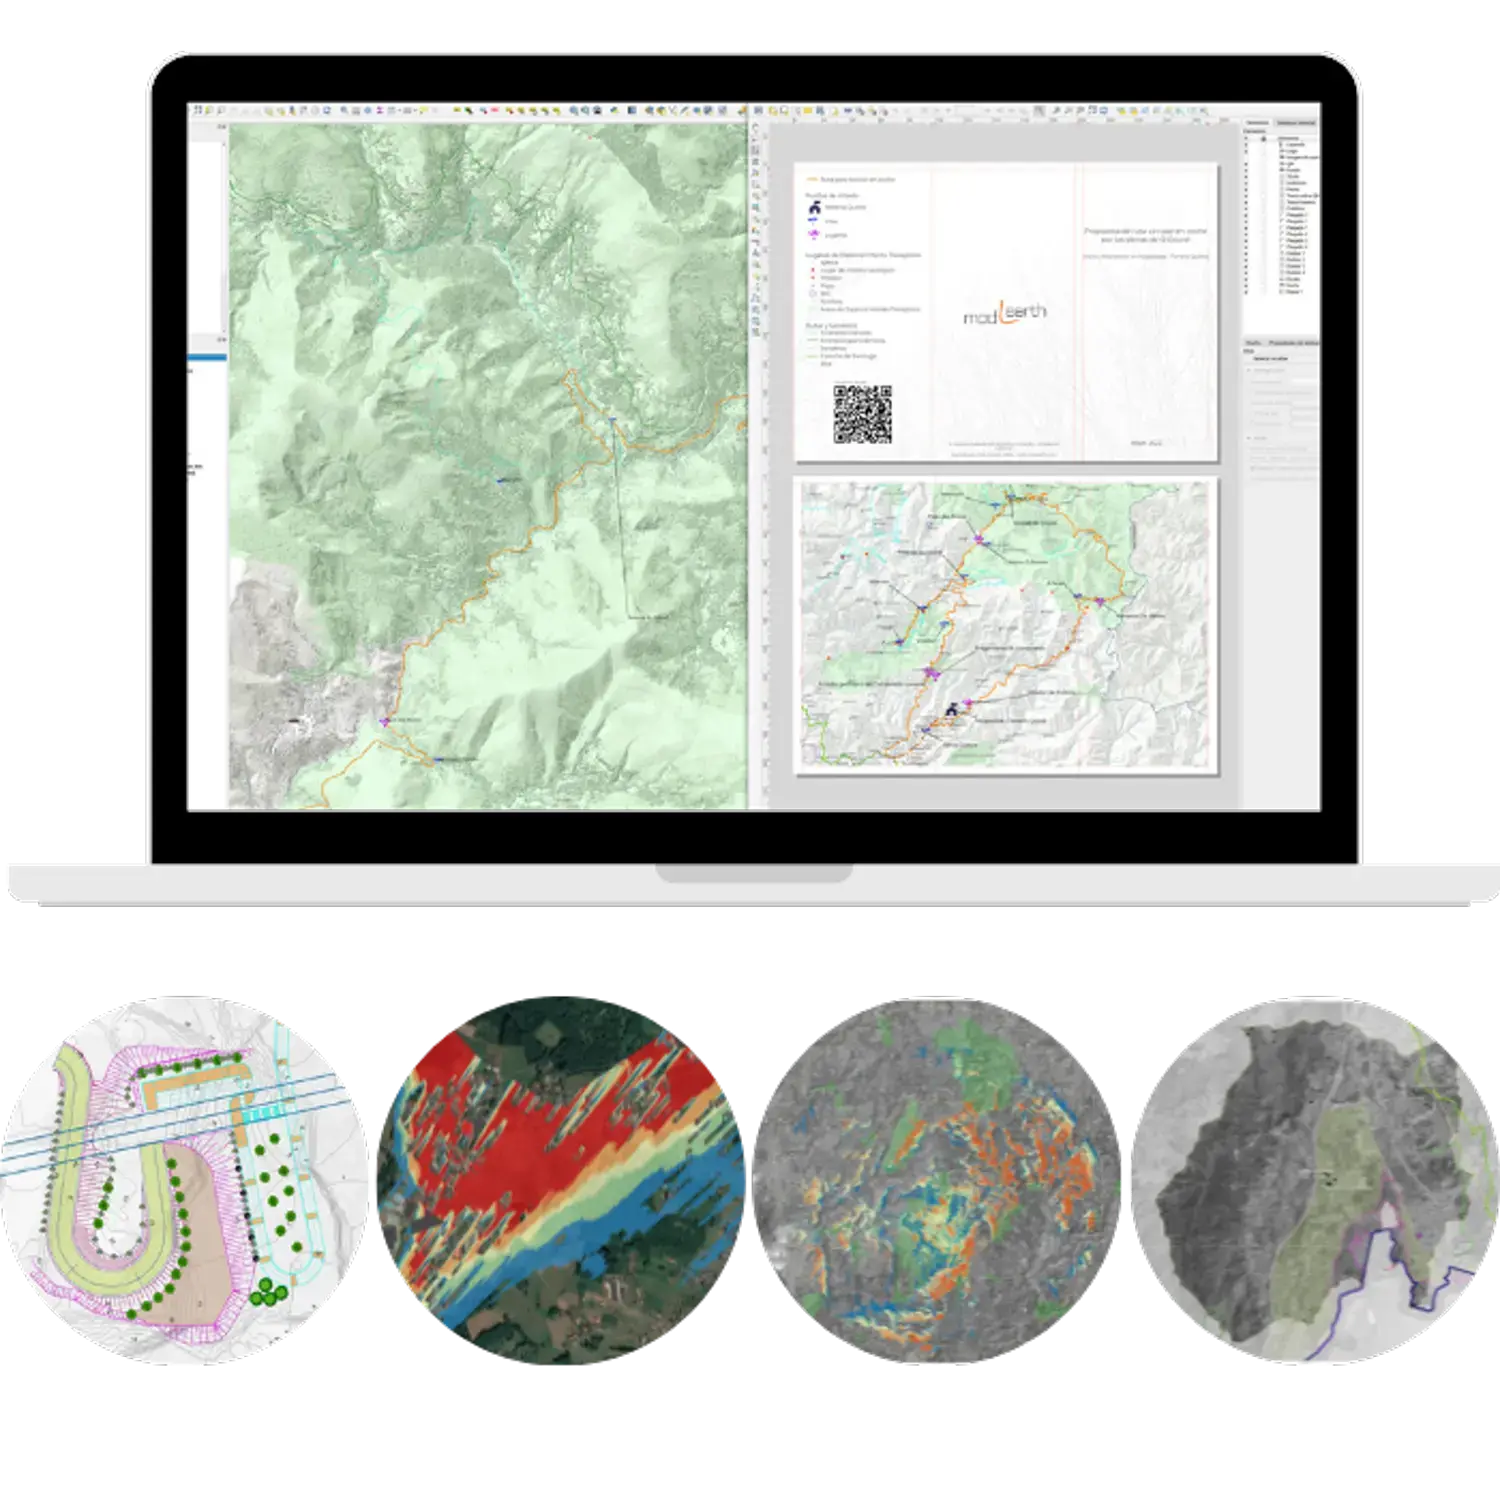 QGIS - Open Source GIS Software for Data Analysis and Mapping